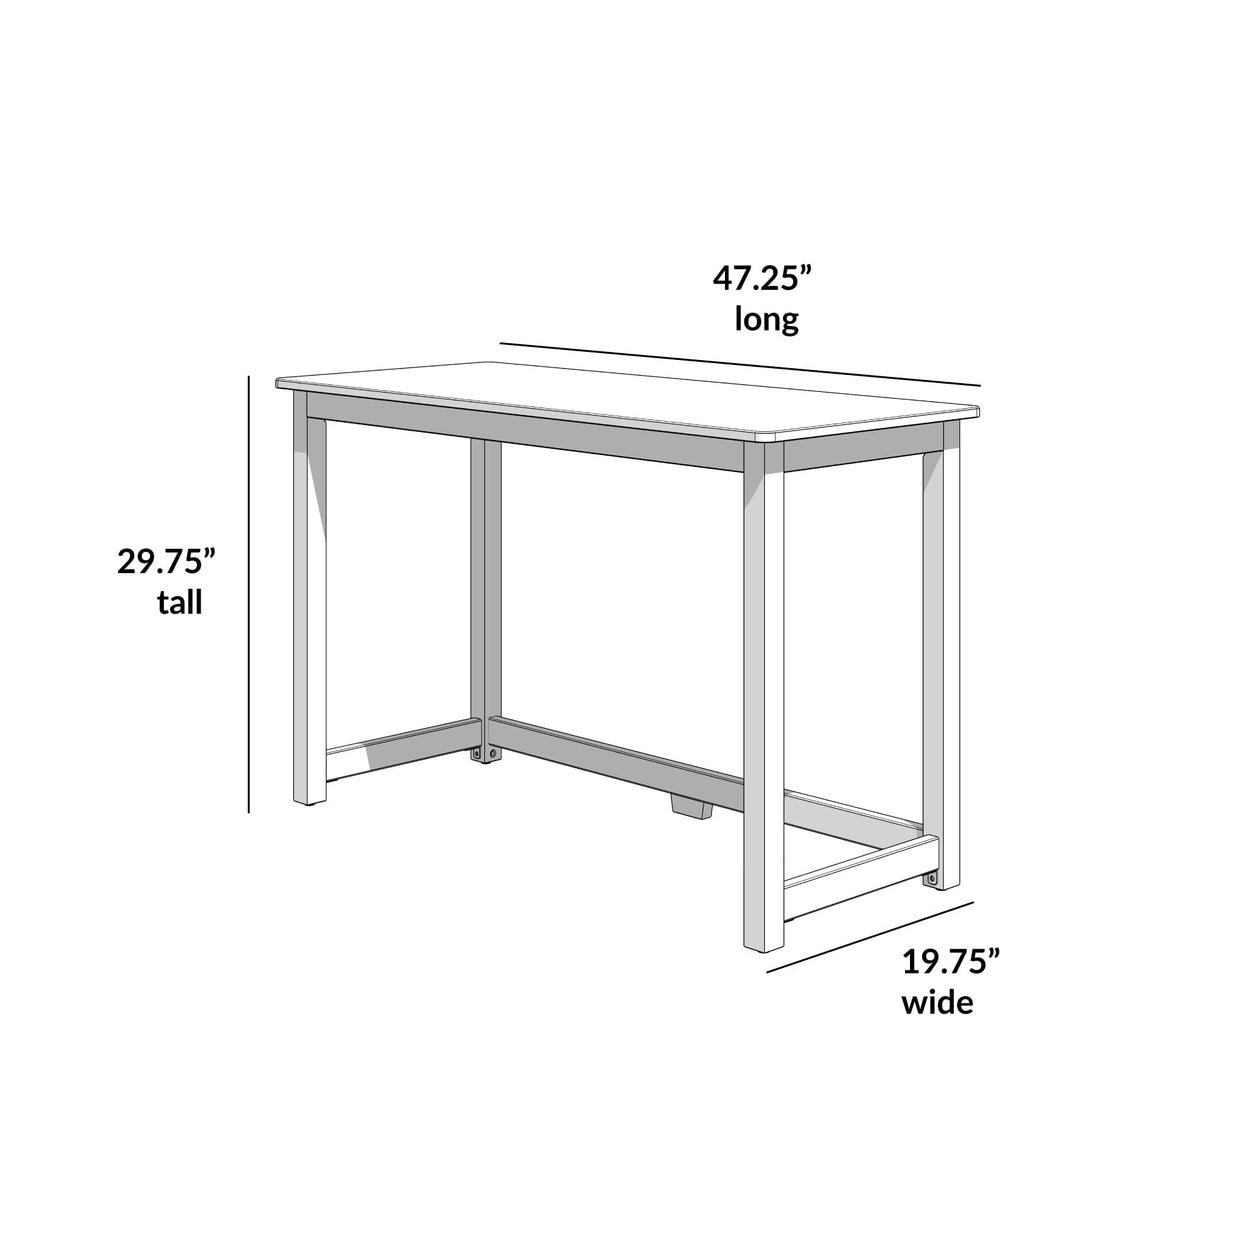 181200-001 : Furniture Simple Desk - 47 inches, Natural